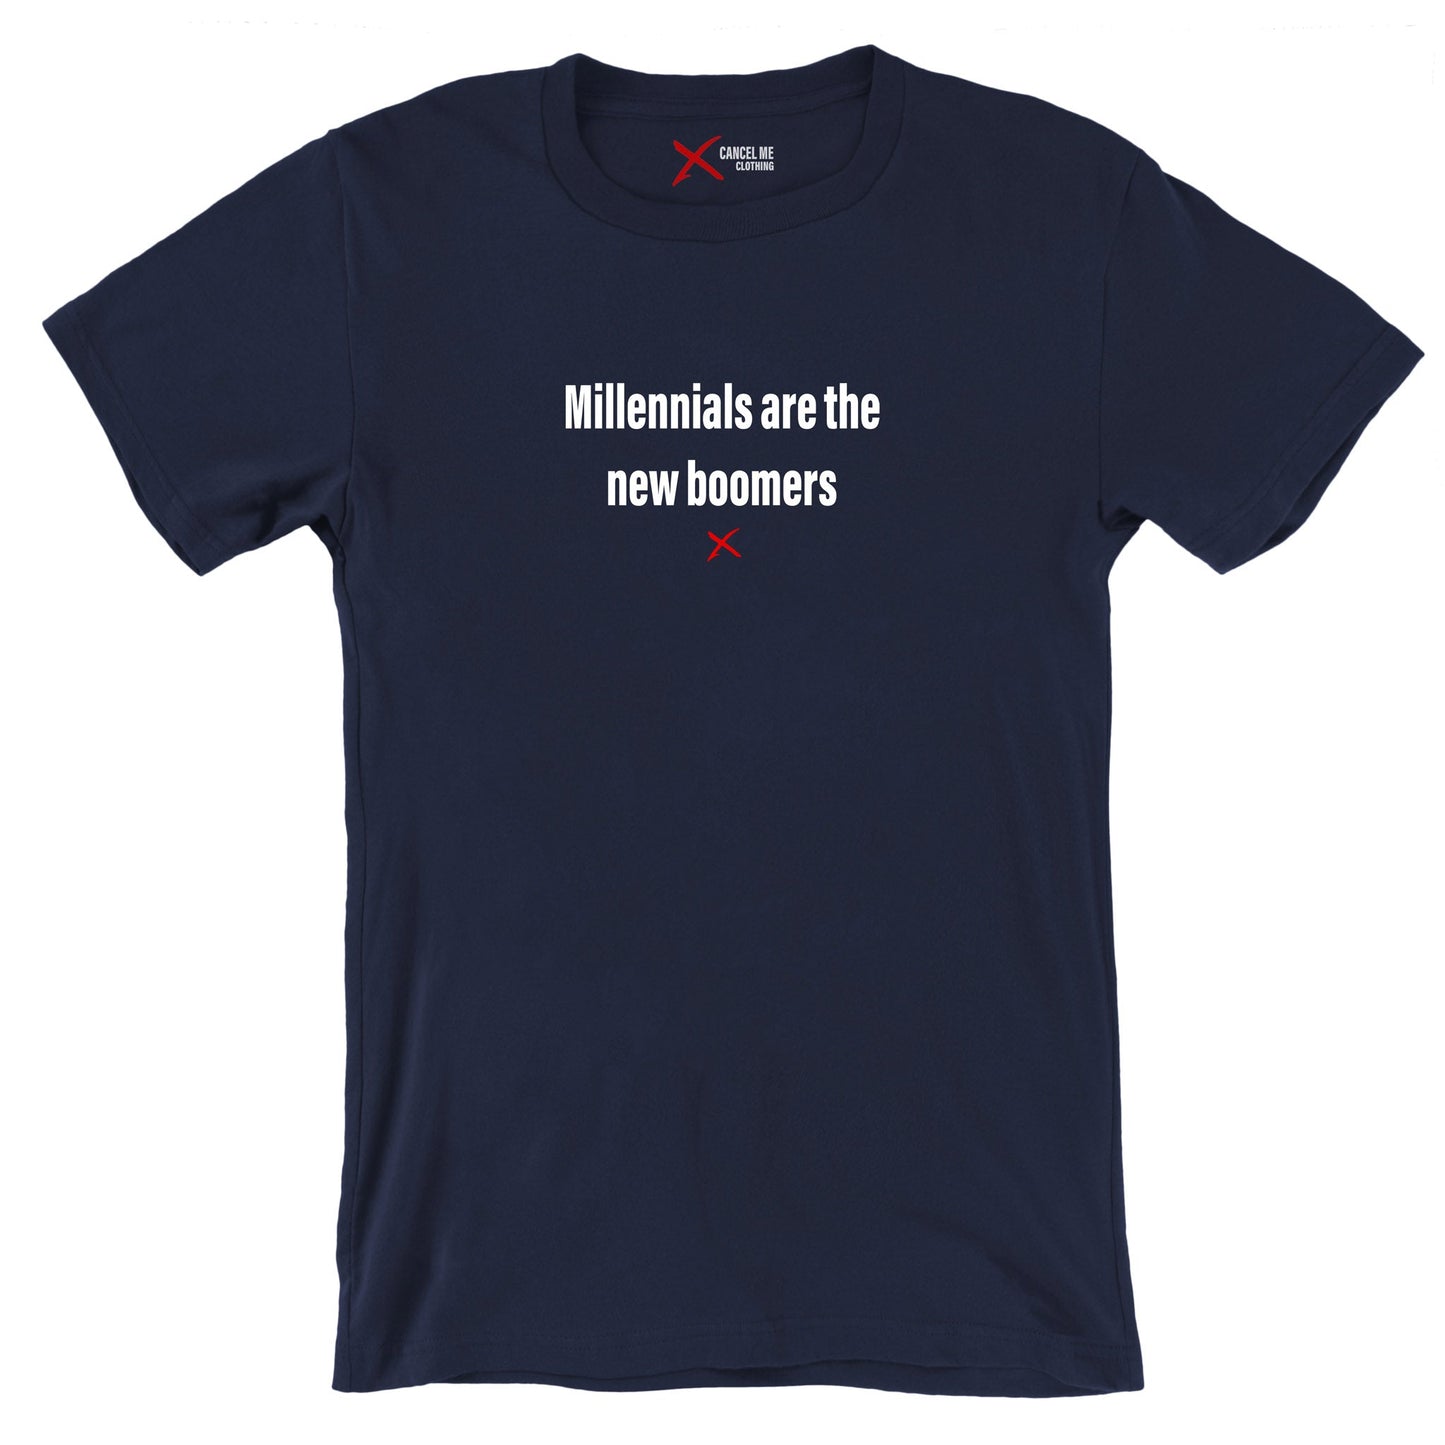 Millennials are the new boomers - Shirt